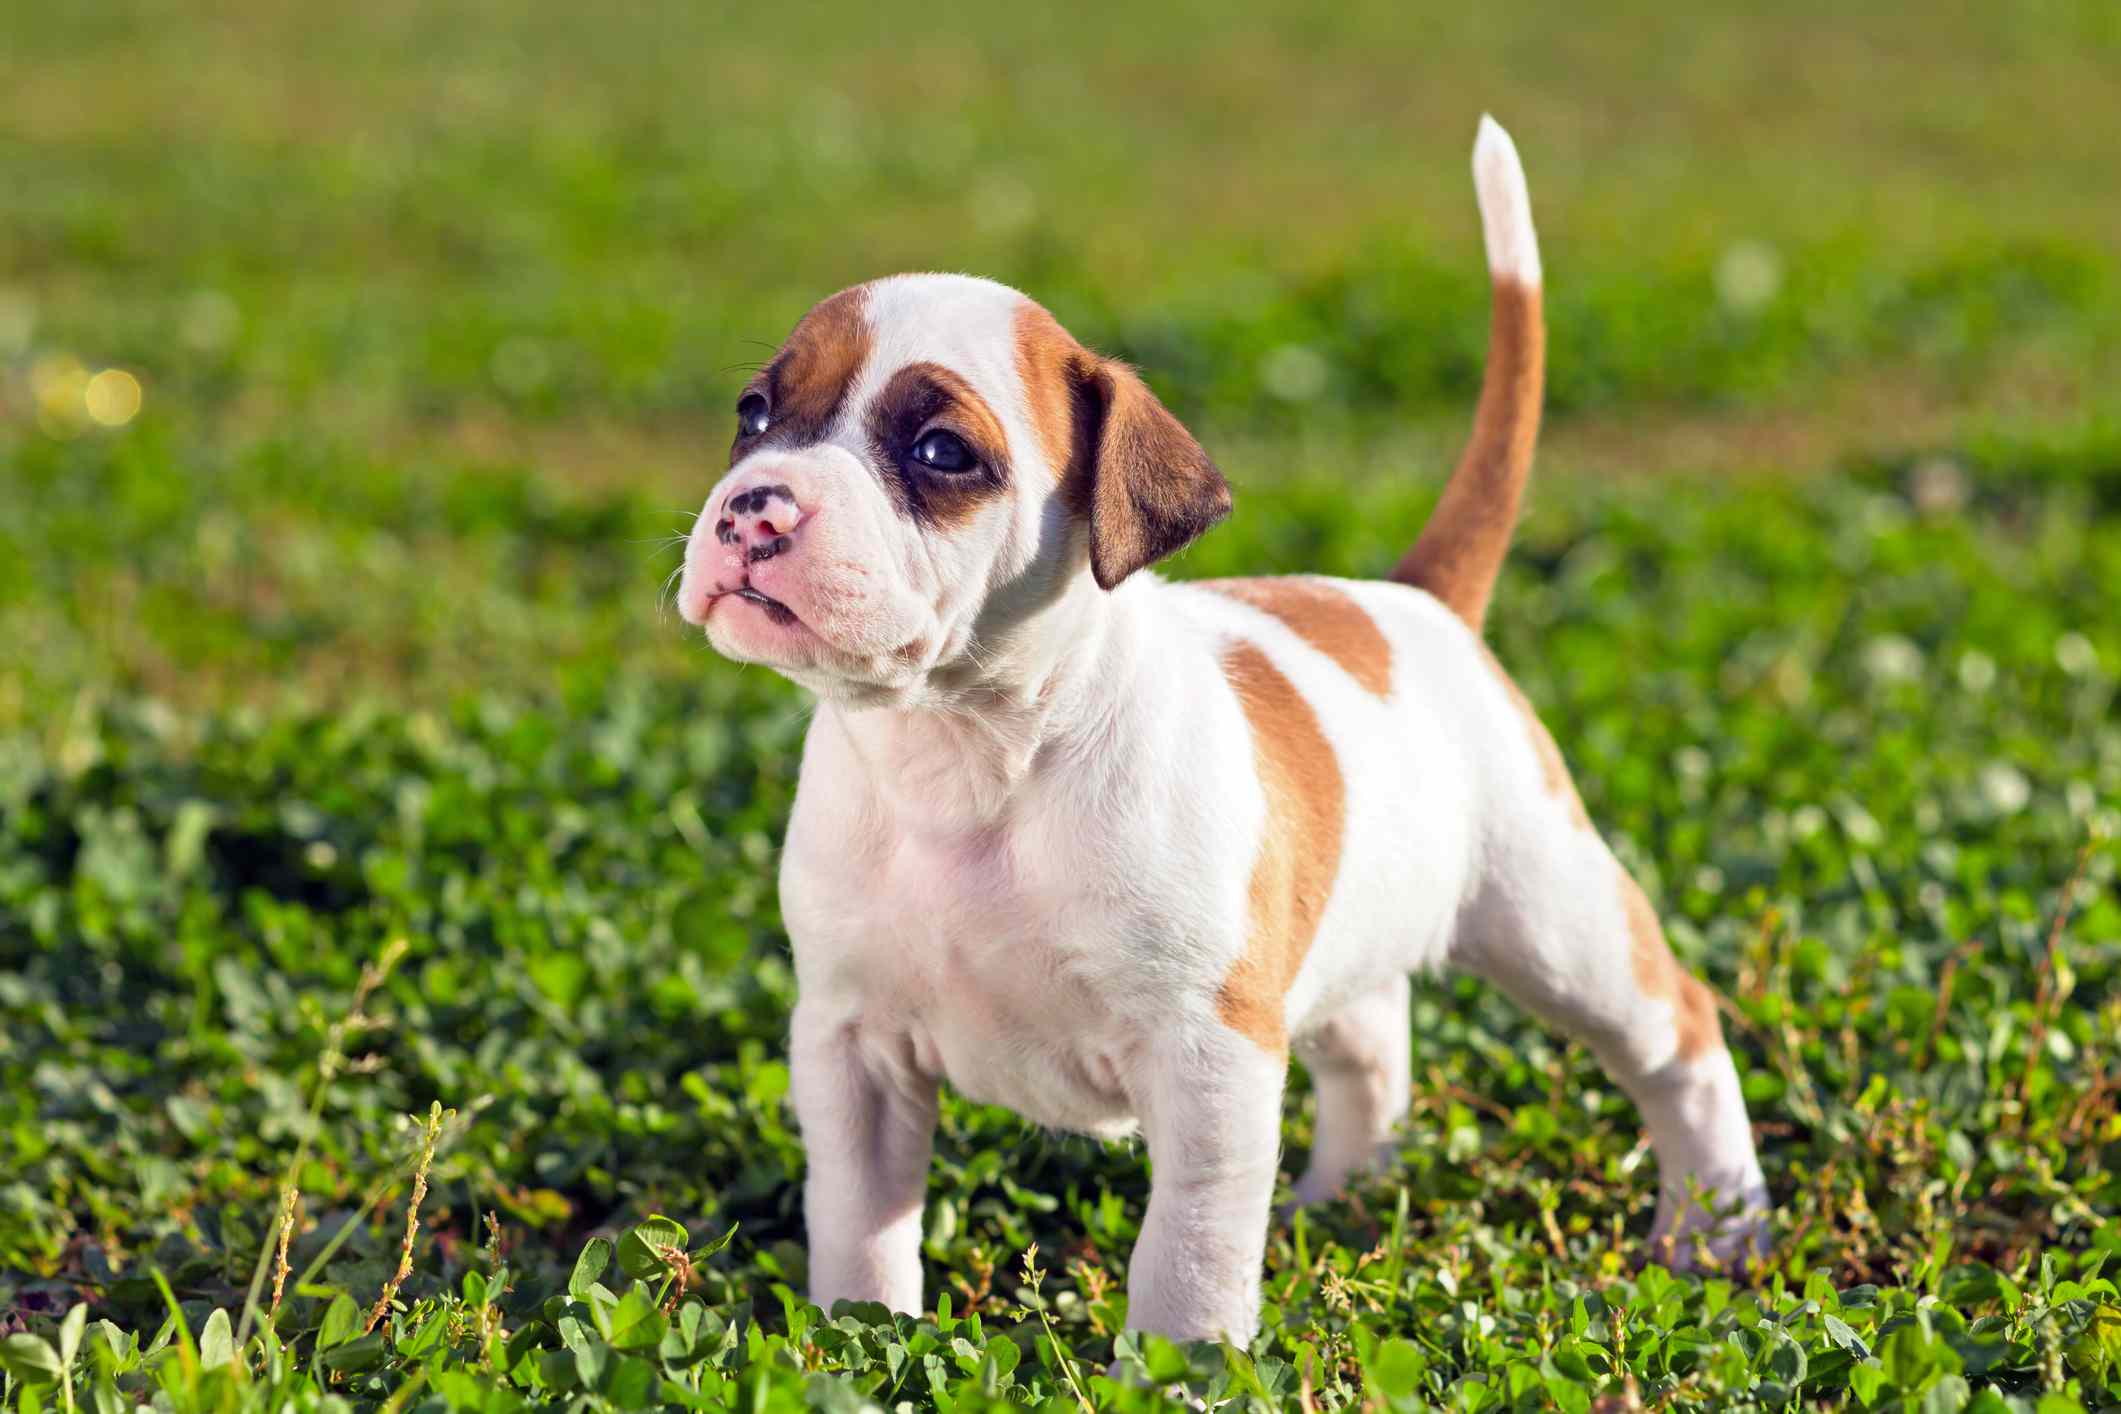 American Staffordshire terrier puppy standing on grass